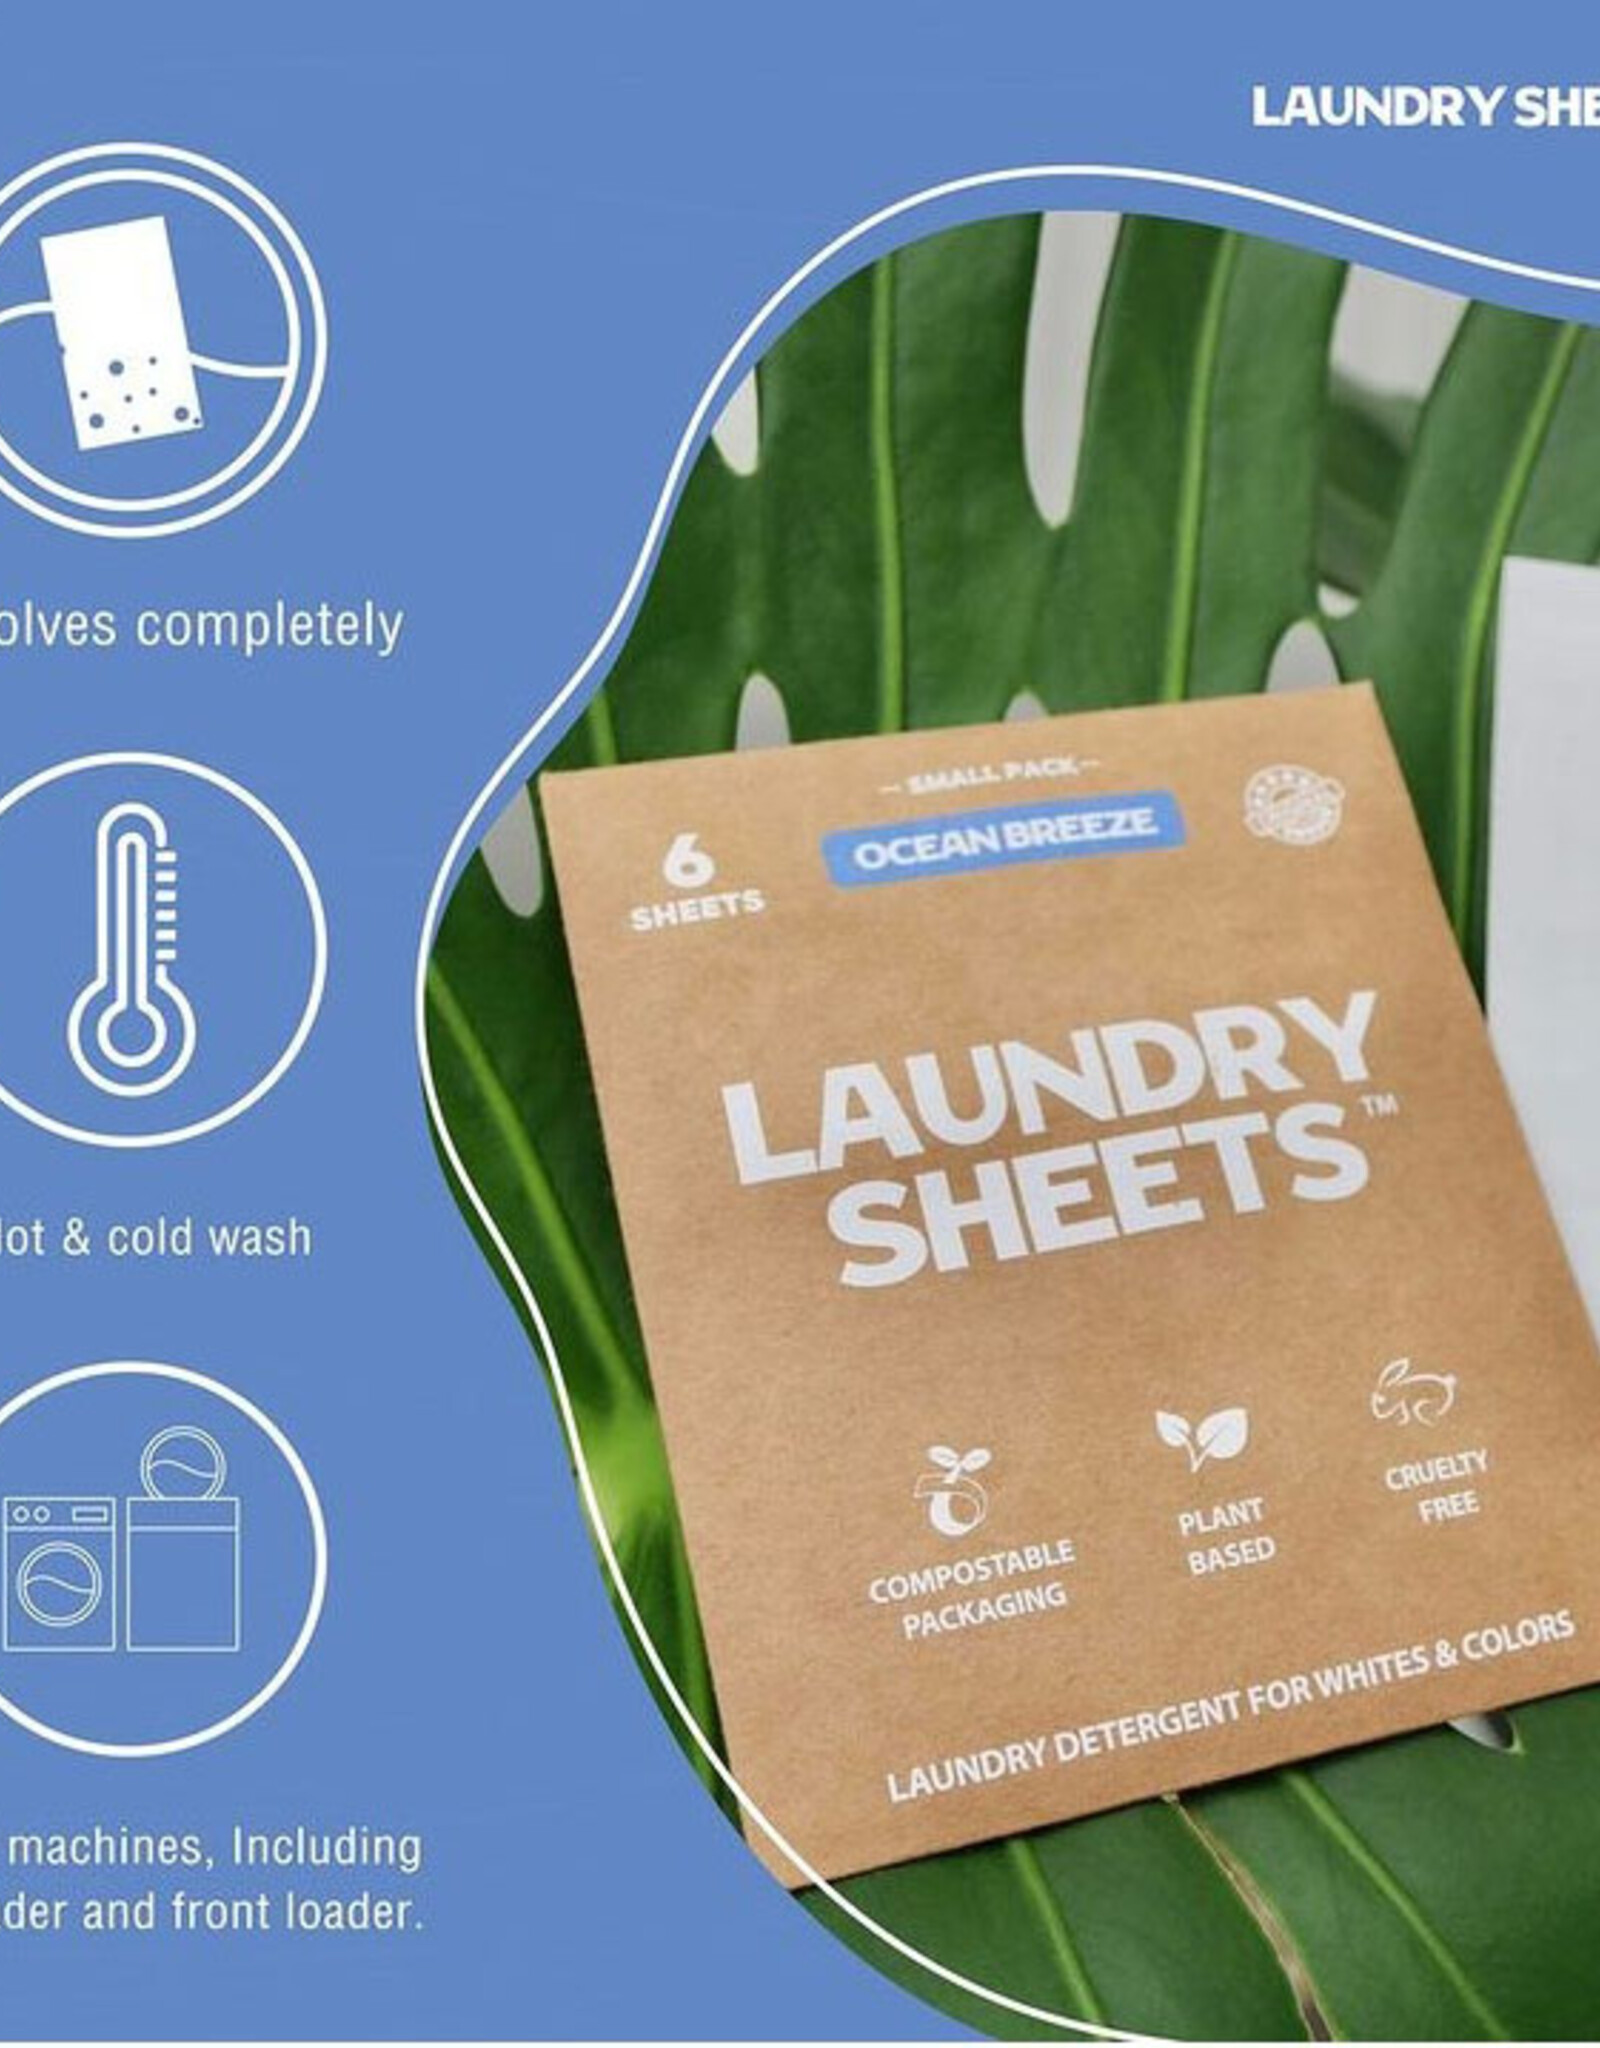 Laundry Sheets Laundry Sheets - Ocean breeze (6 Loads/Washes)